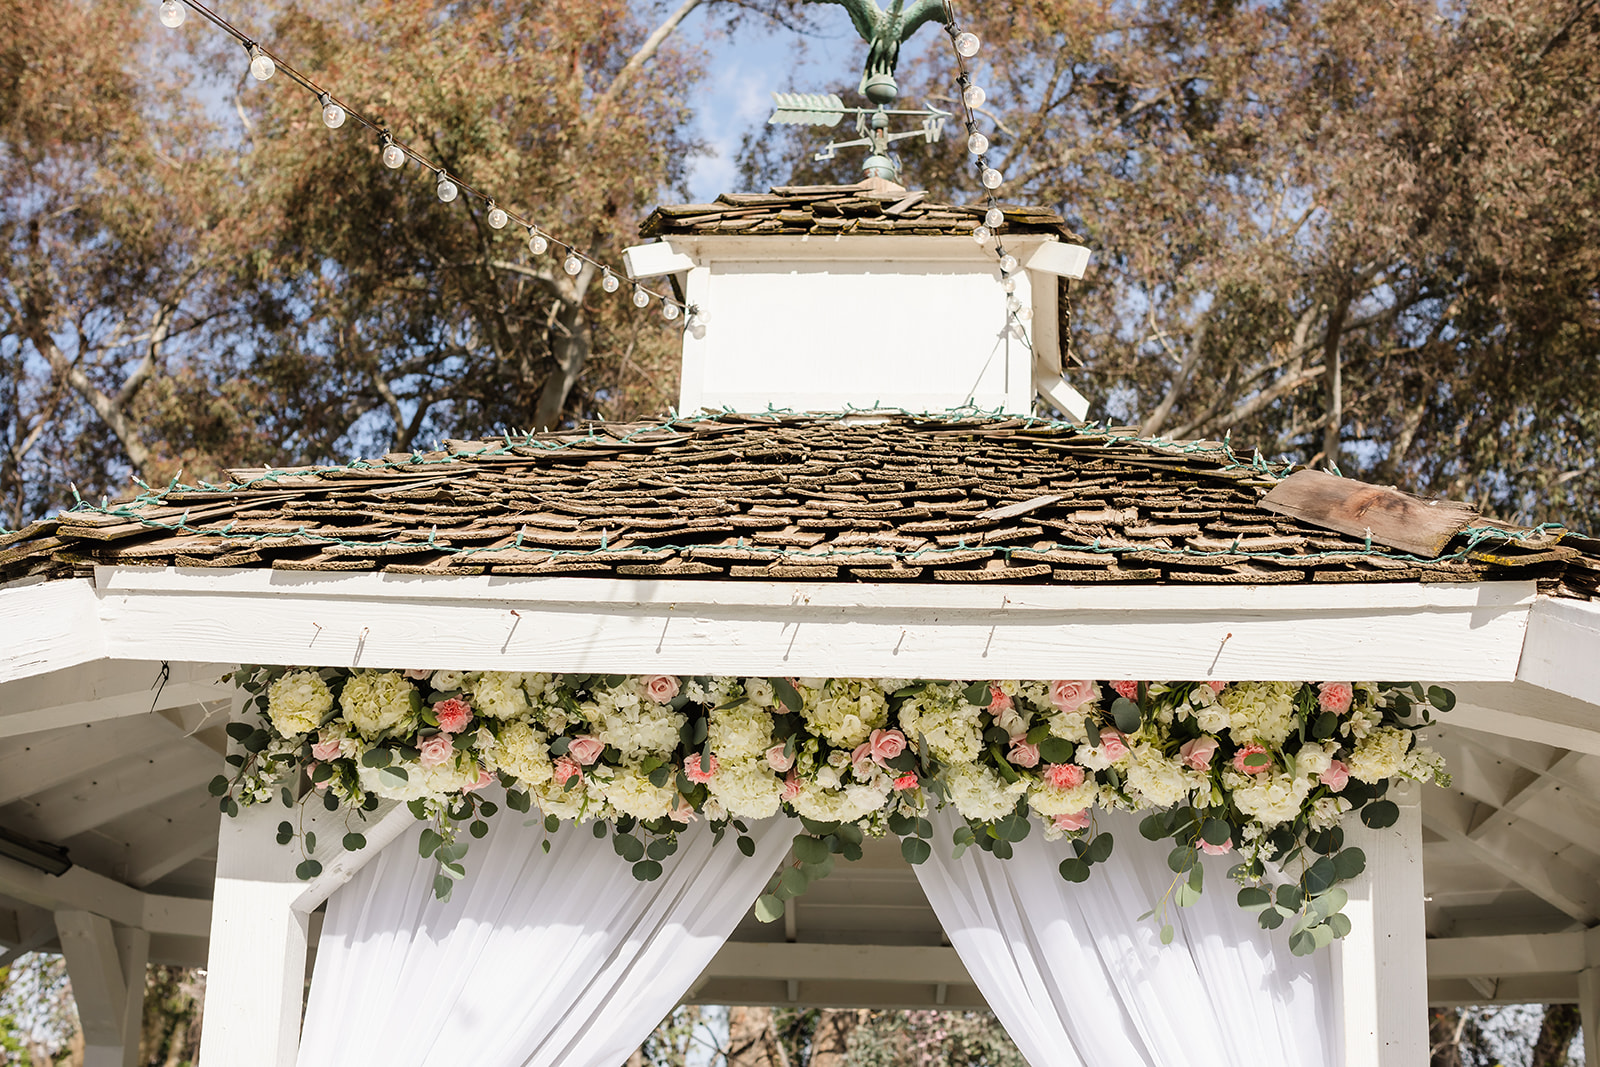 Pink and white roses used as decor across the top of the gazebo at The Orchard